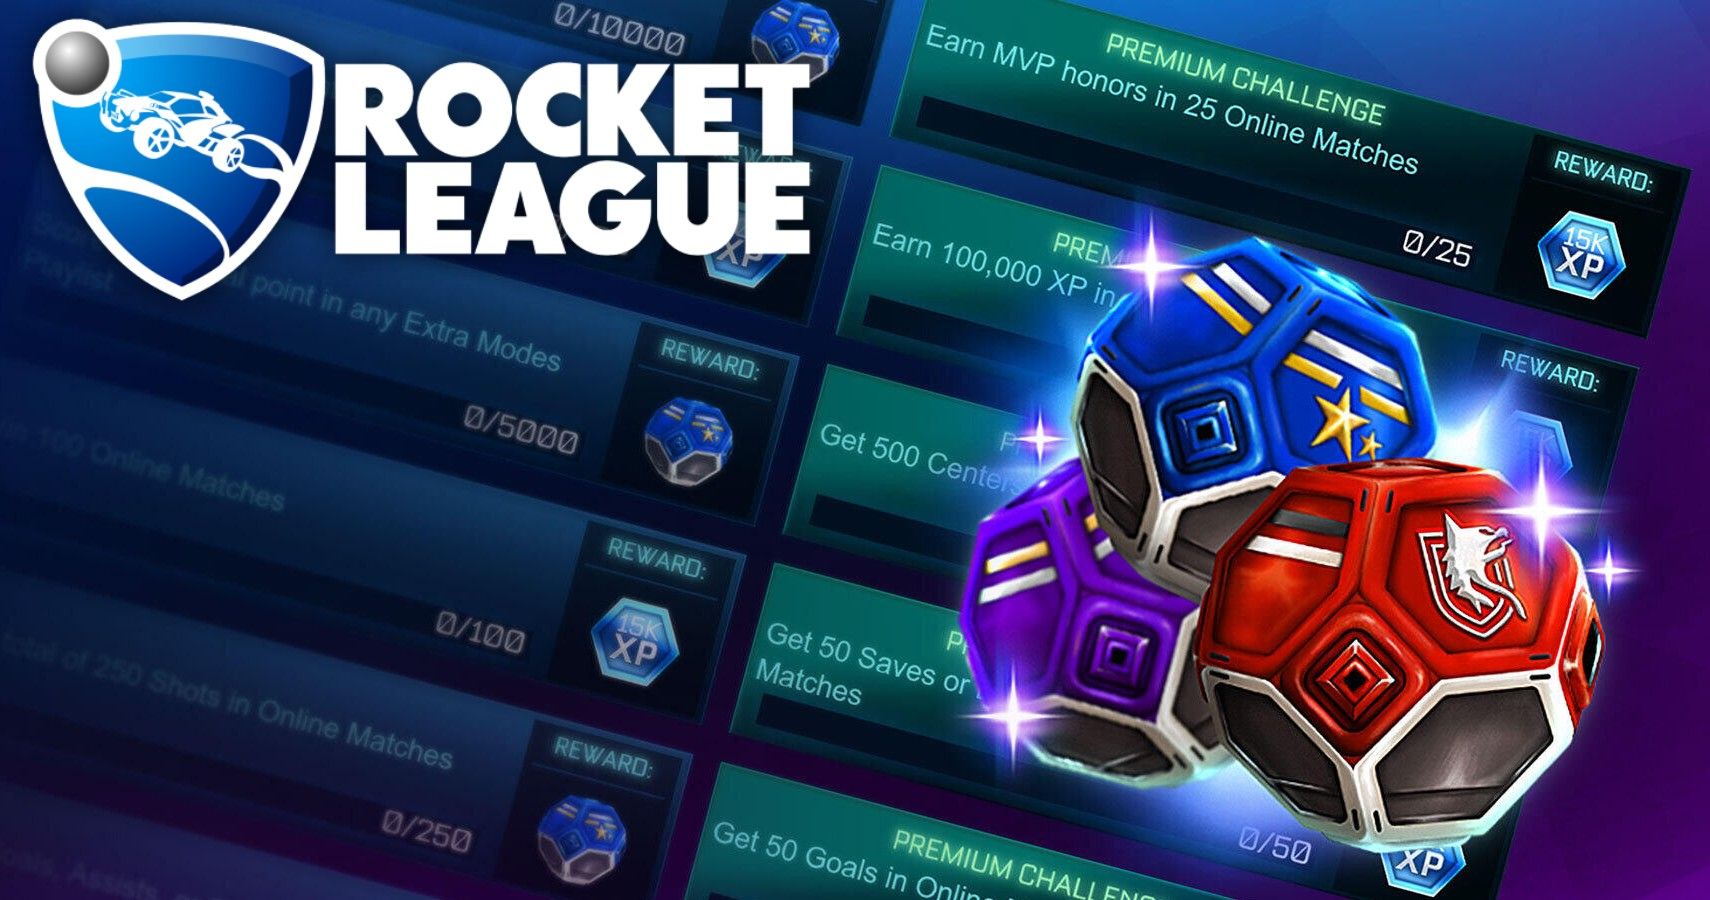 An image of the challenges menu for Rocket League